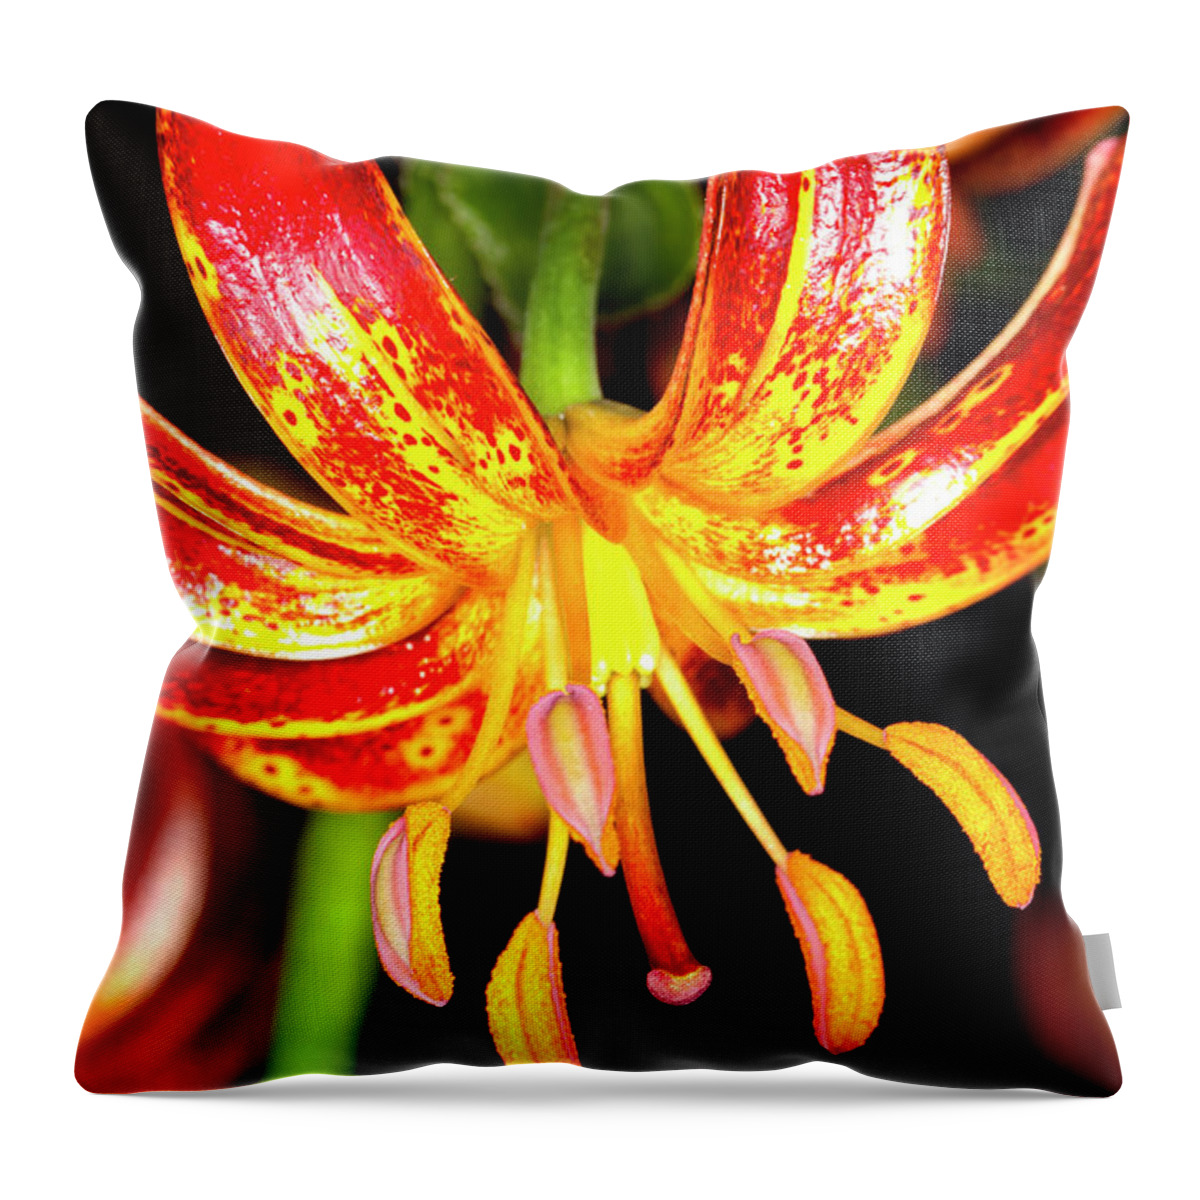 Martagon Lily Throw Pillow featuring the photograph Martagon Lily #4 by Anthony Totah